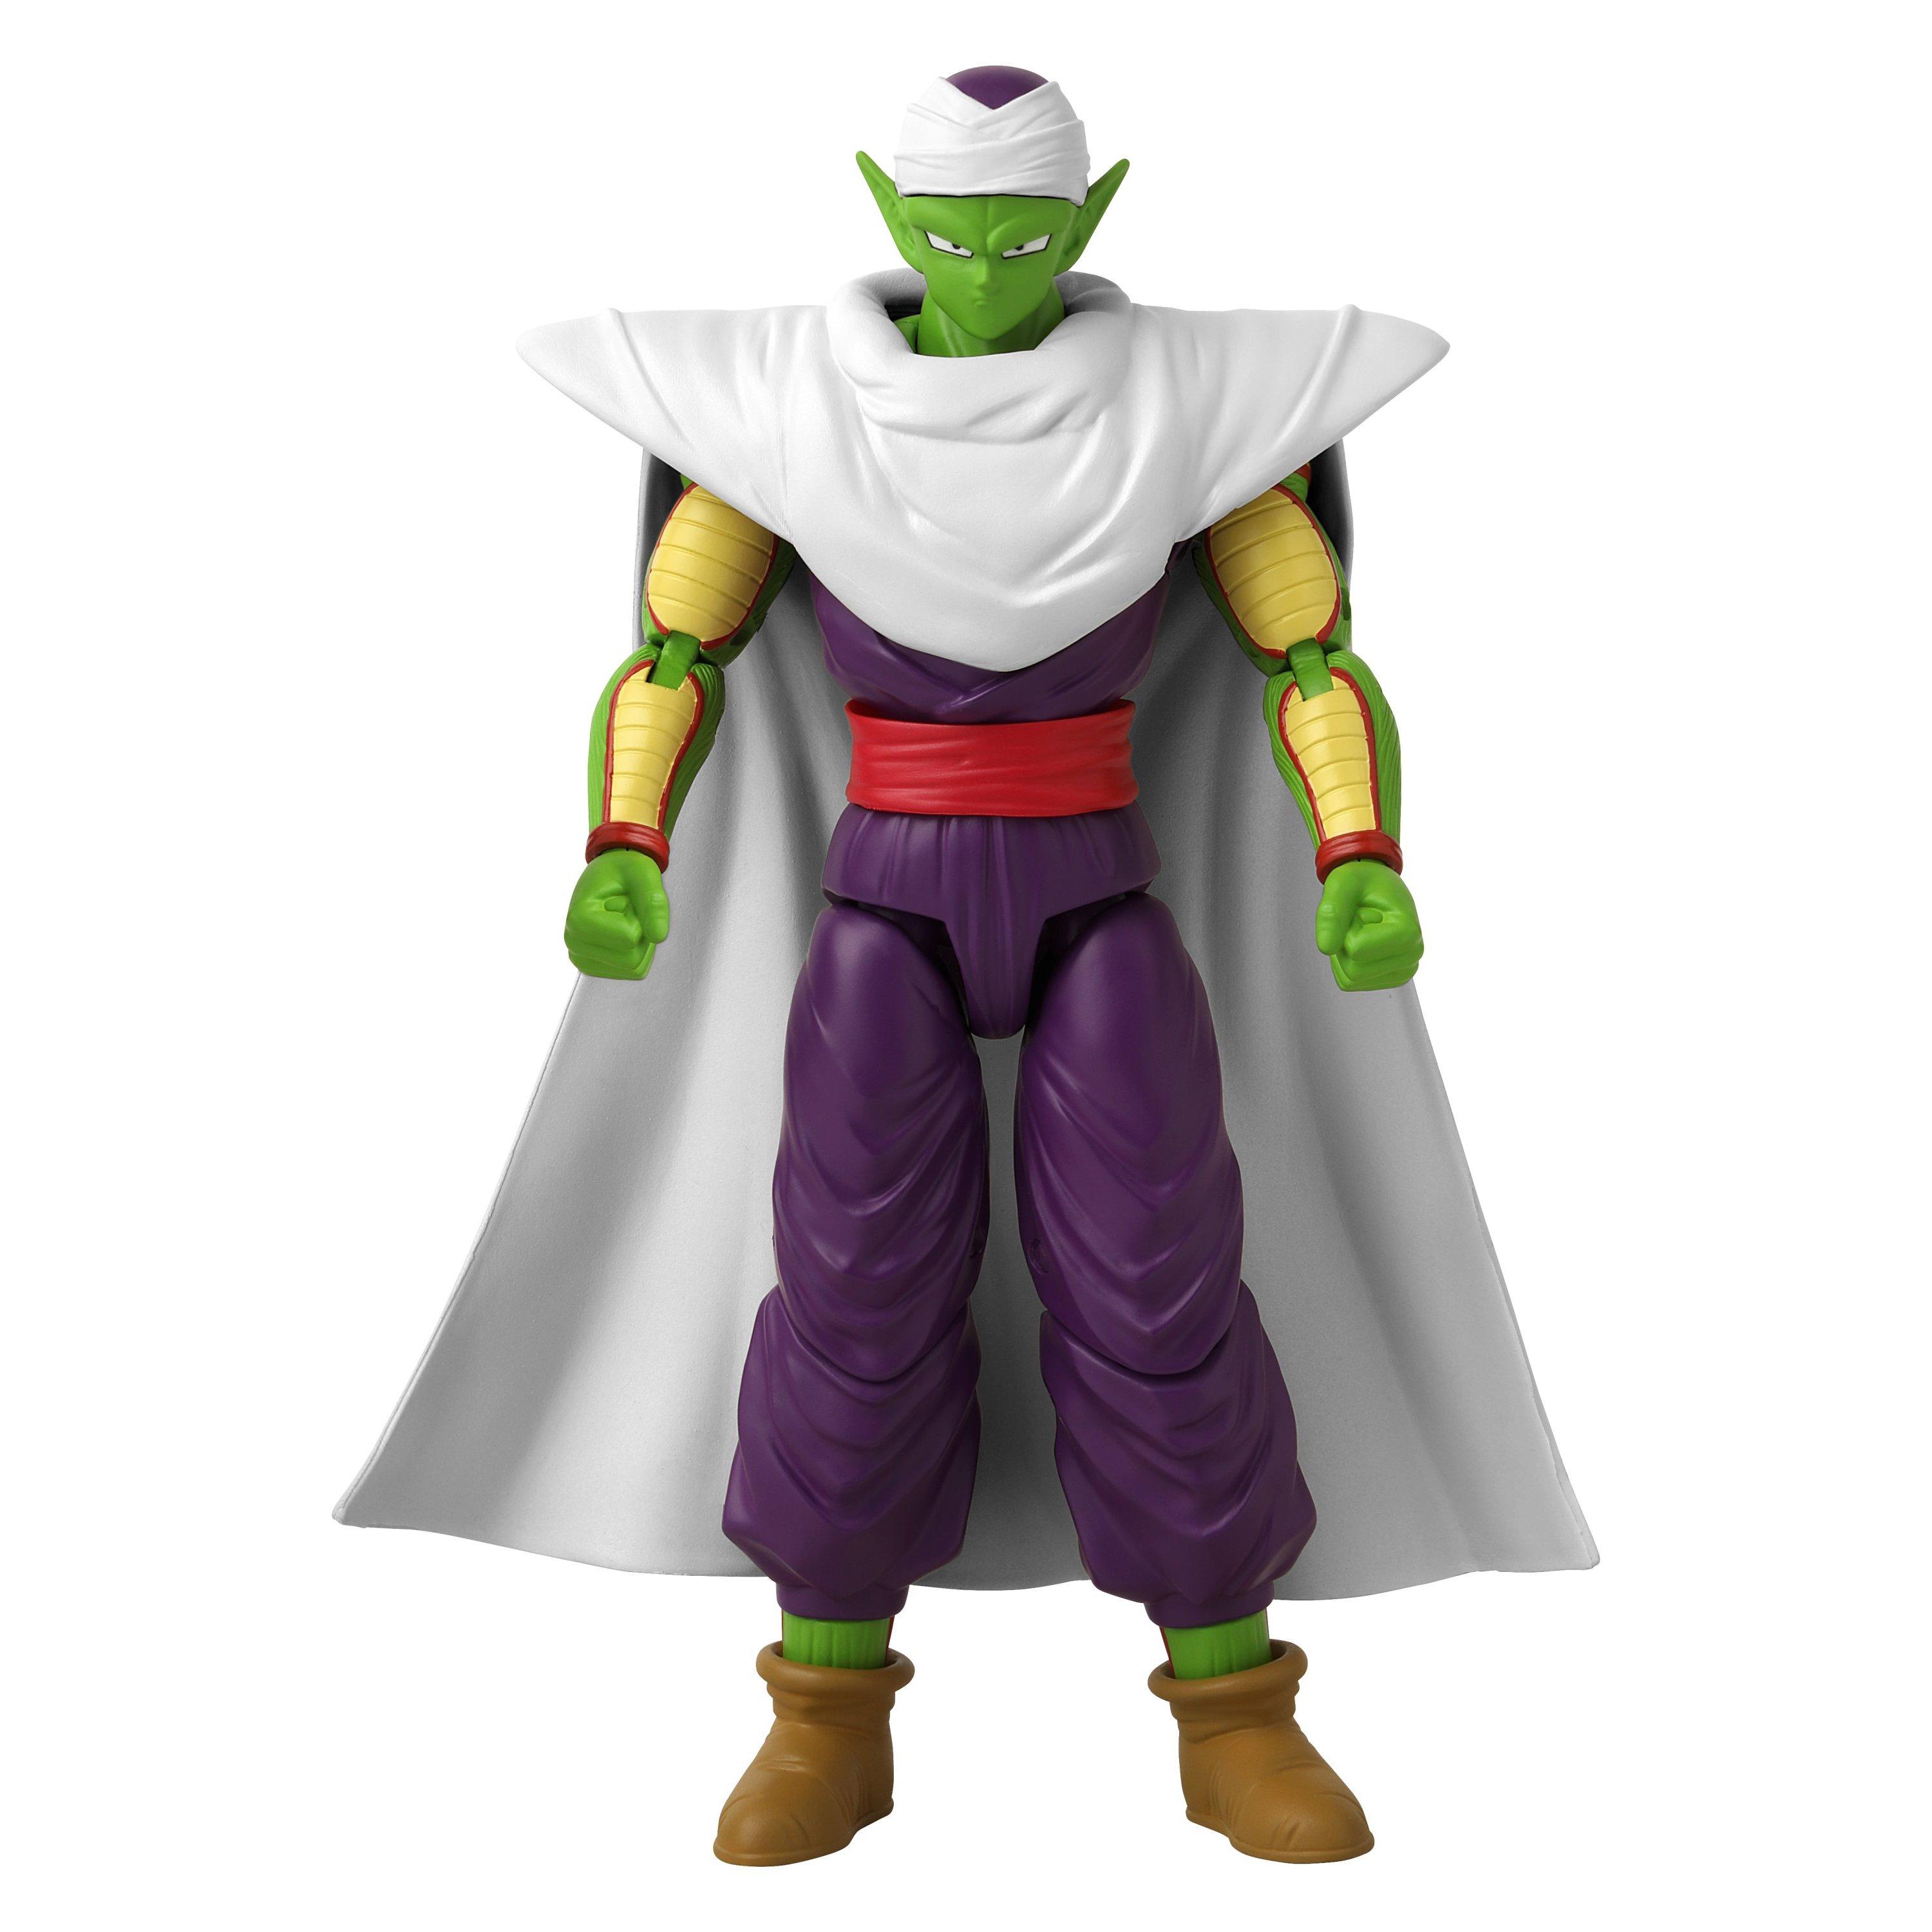 Dragon Ball Toys in Toys Character Shop 